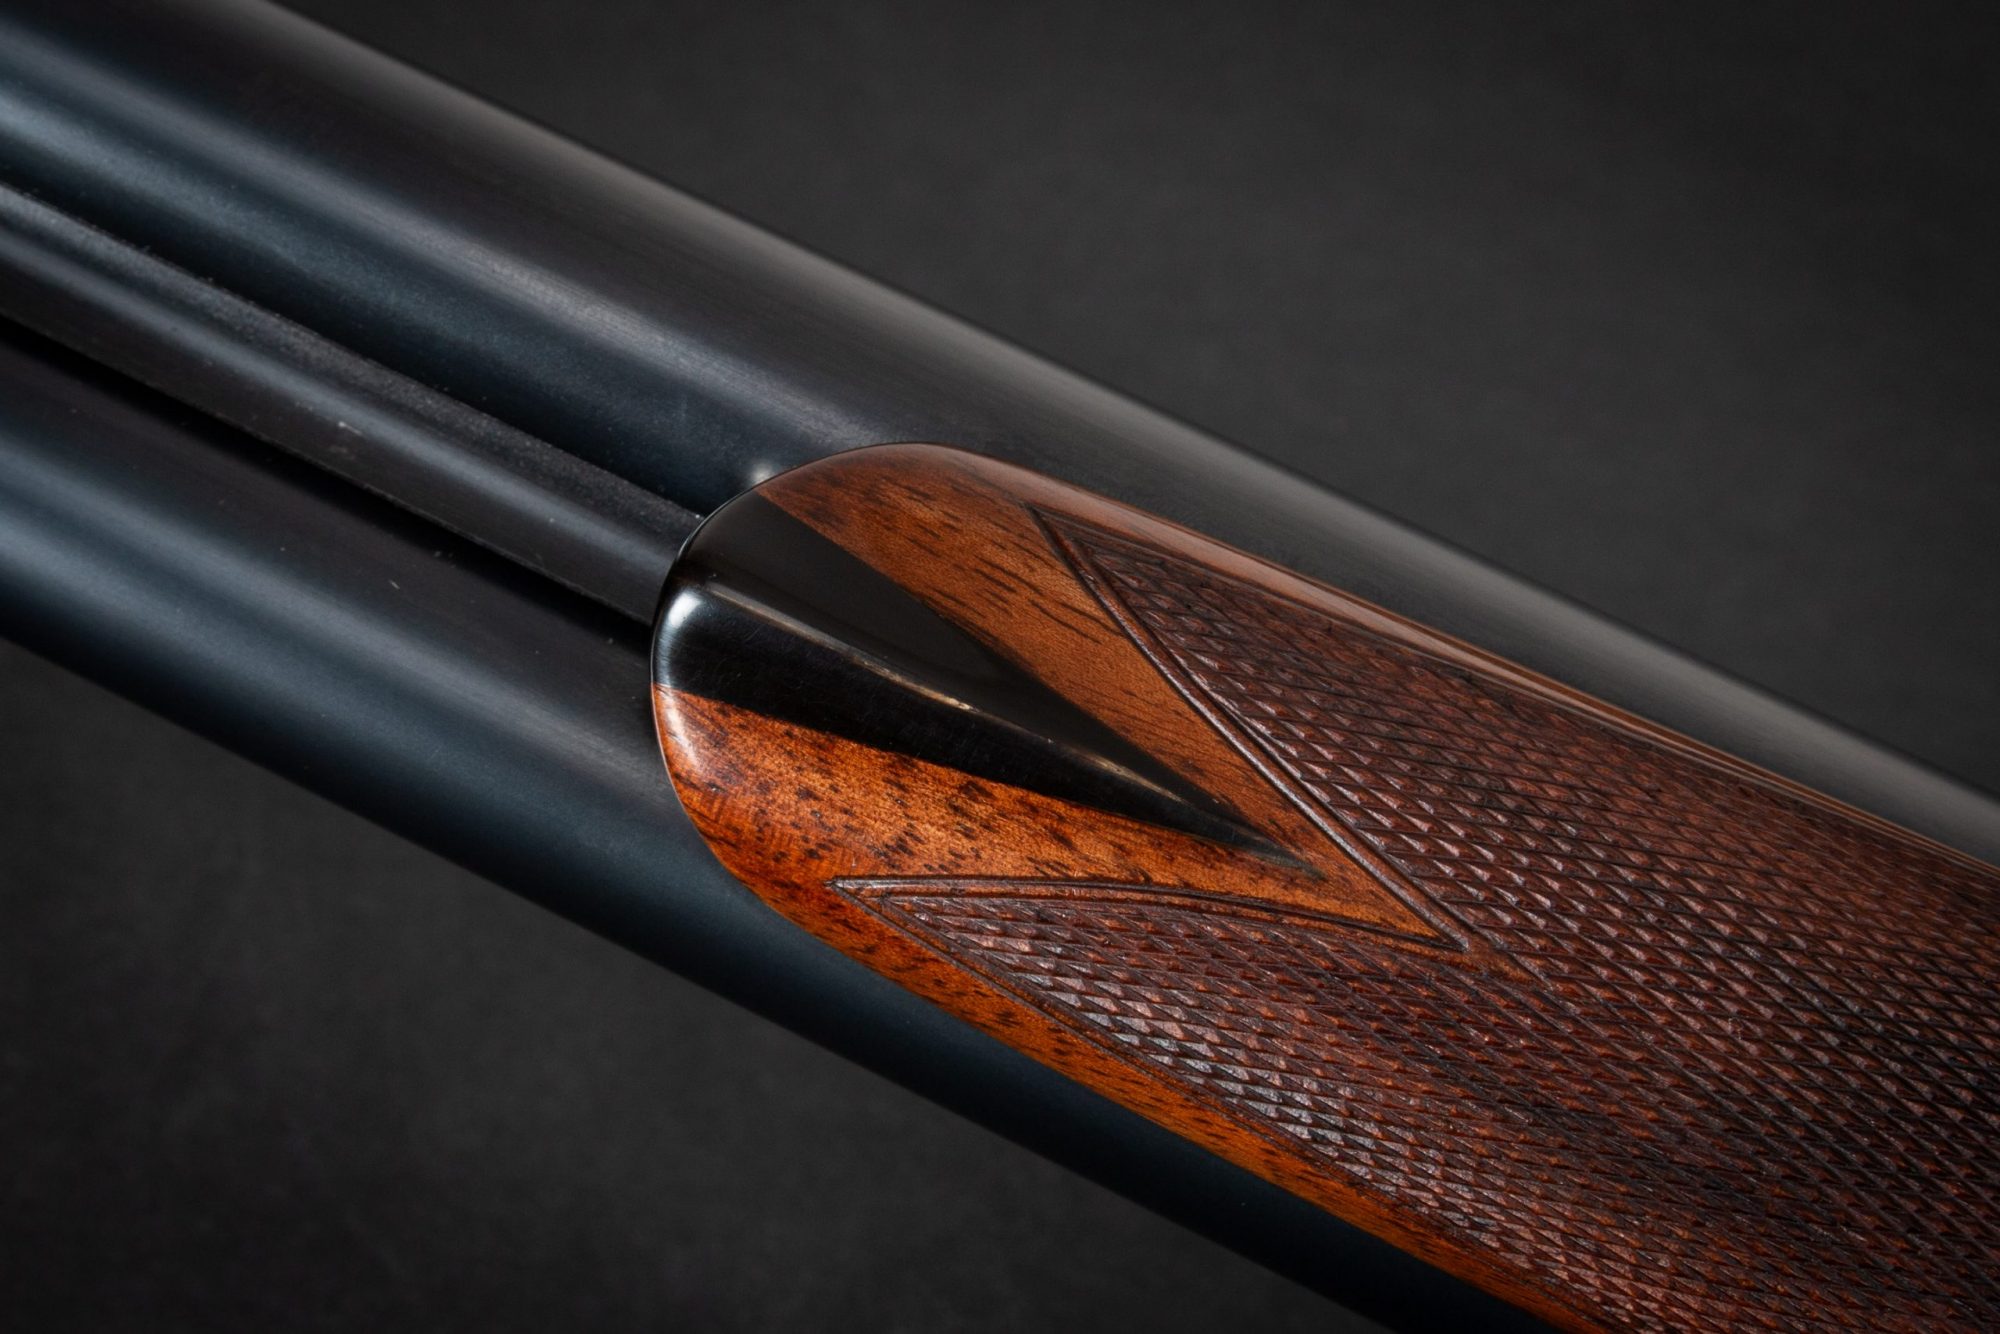 Photo of pre-owned A.H. Fox XE 12 gauge shotgun, featuring metal restoration by Turnbull Restoration